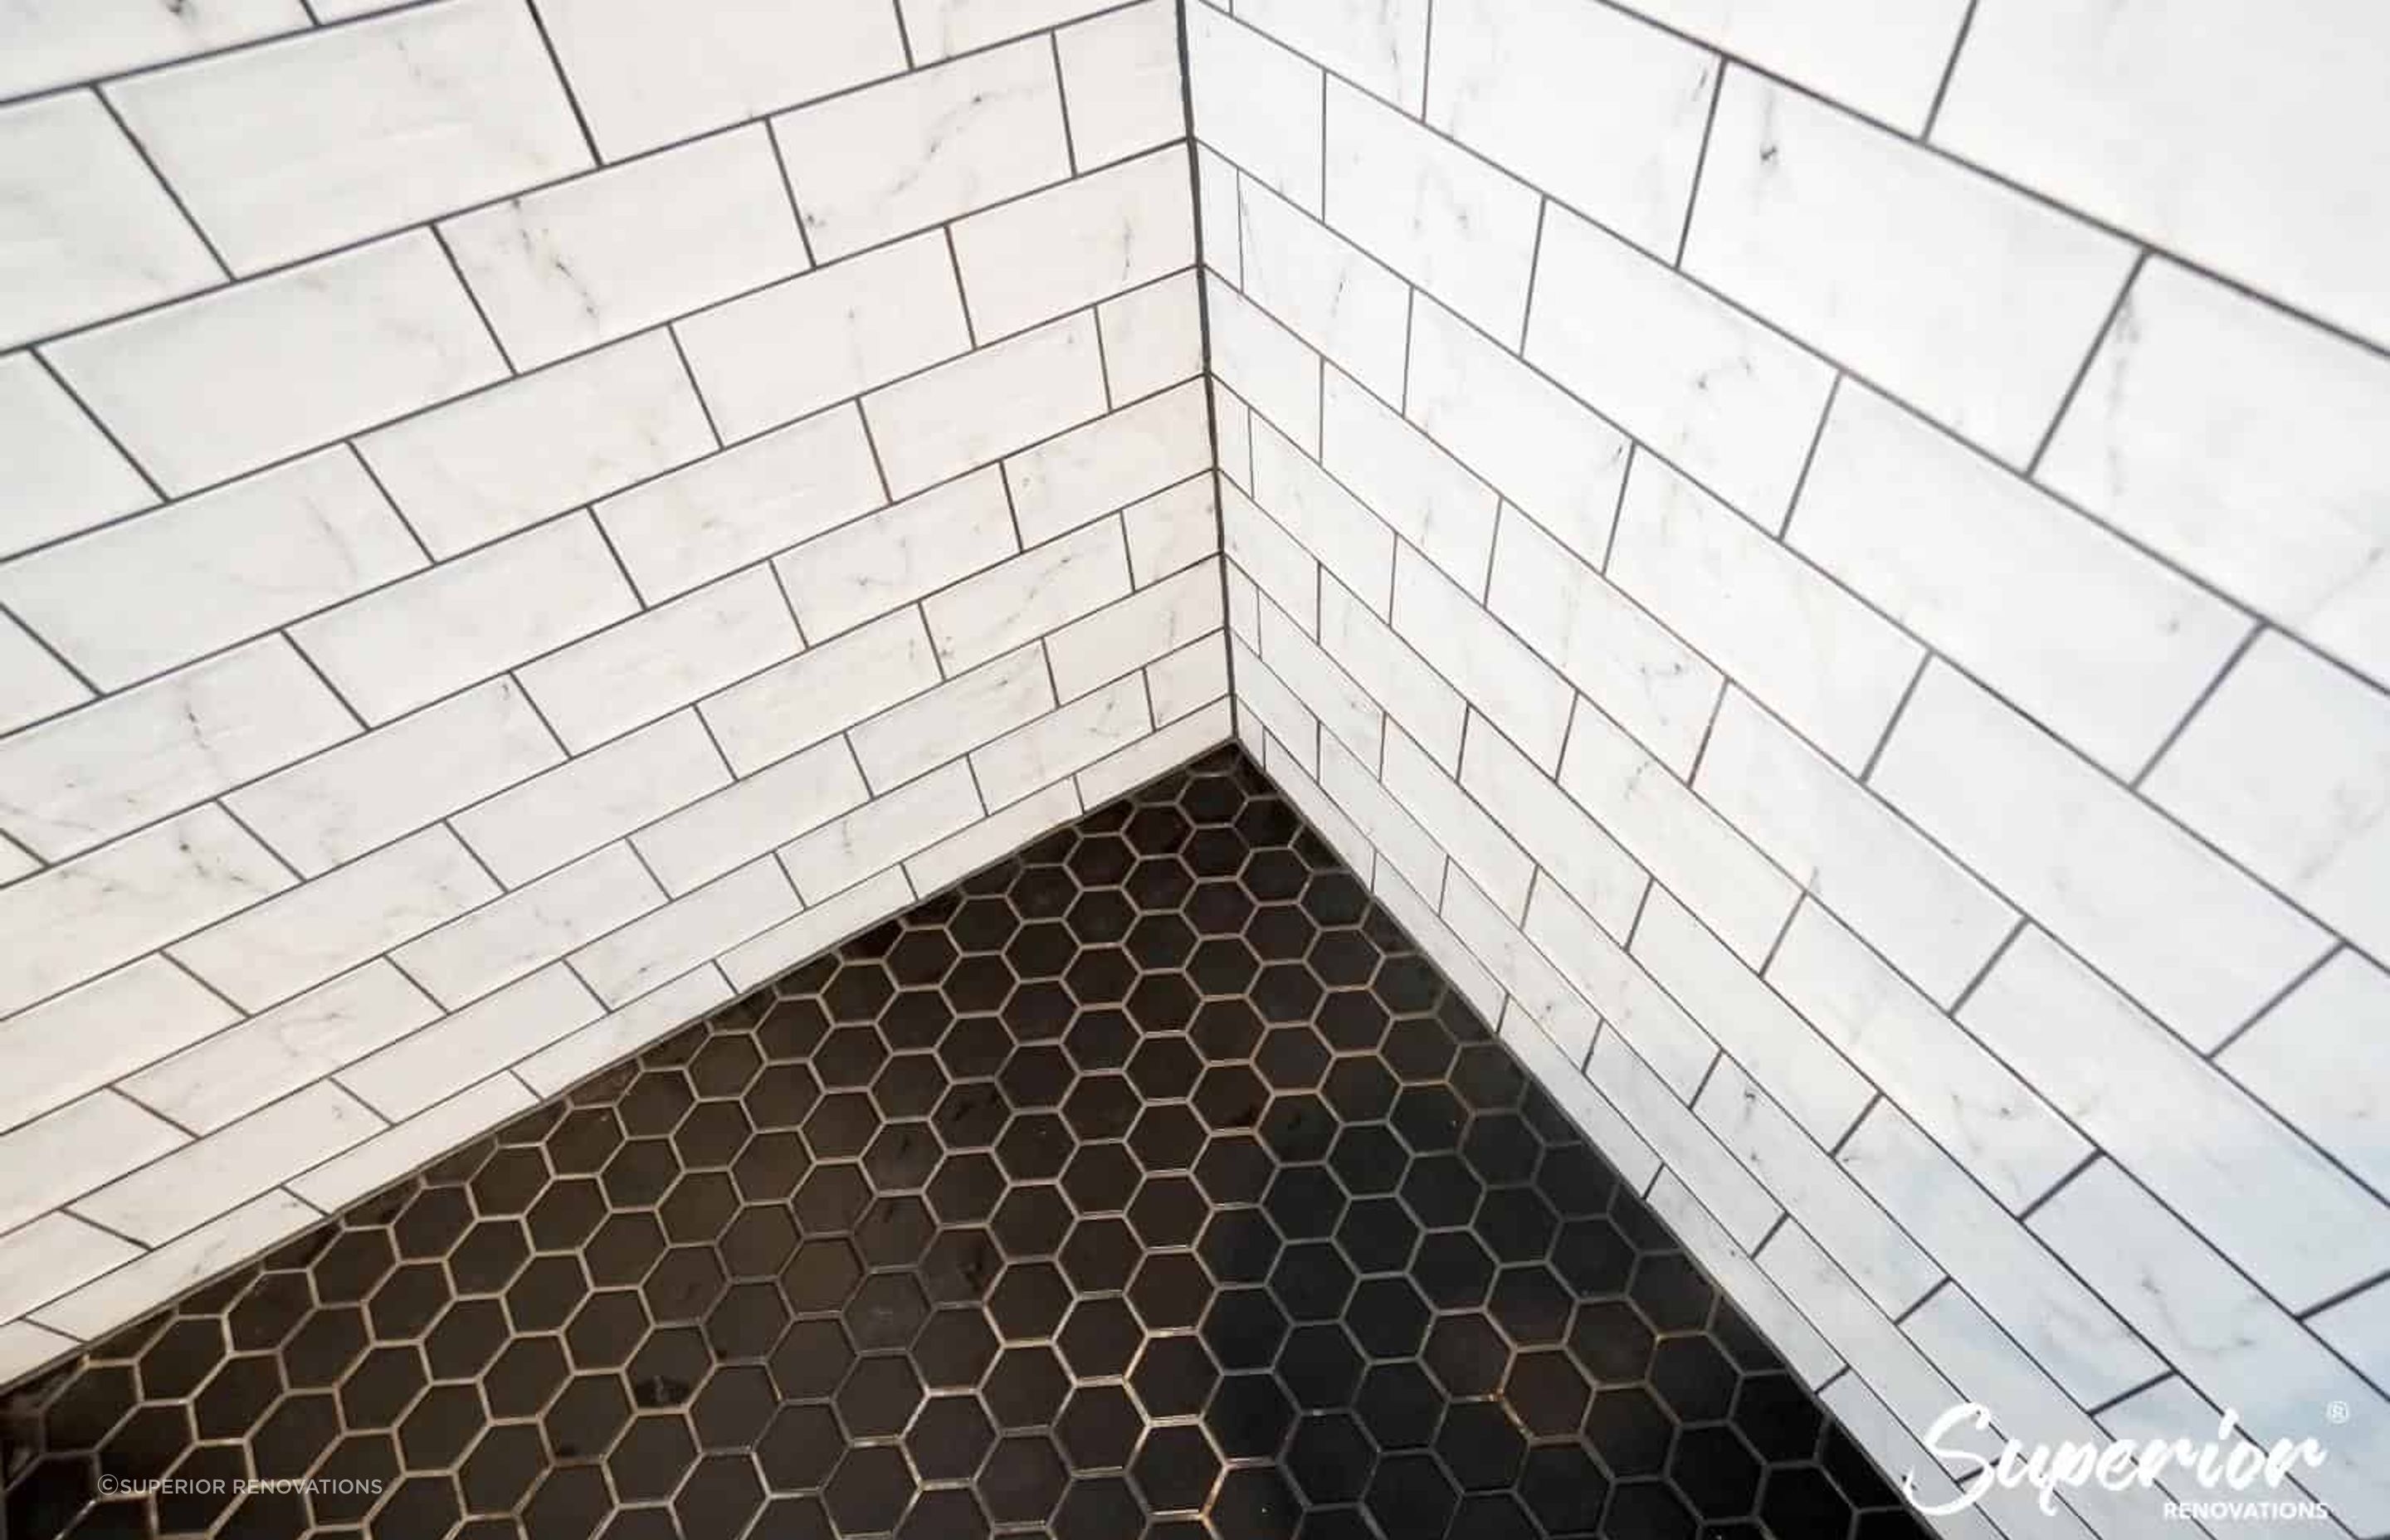 Subway tiles with dark grout